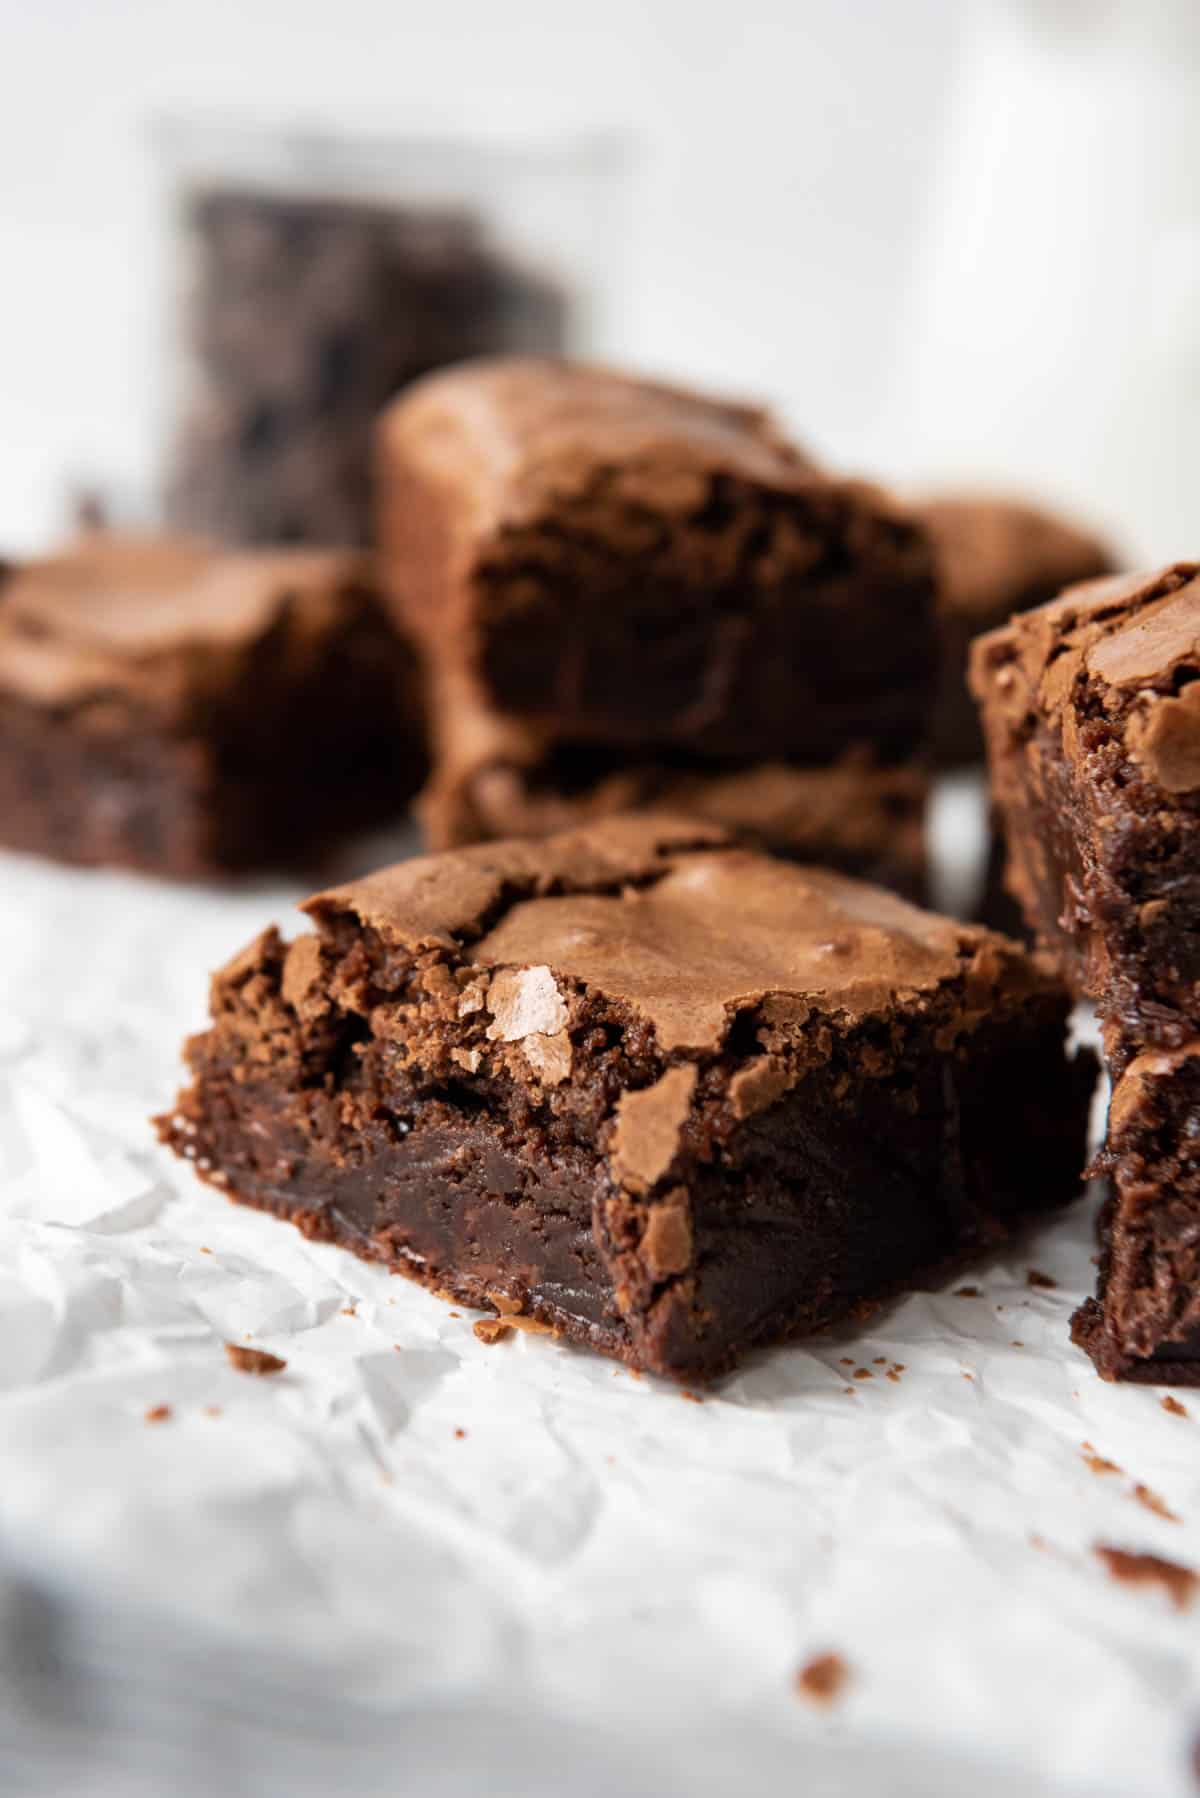 A fudgy homemade brownie with a crackly top.